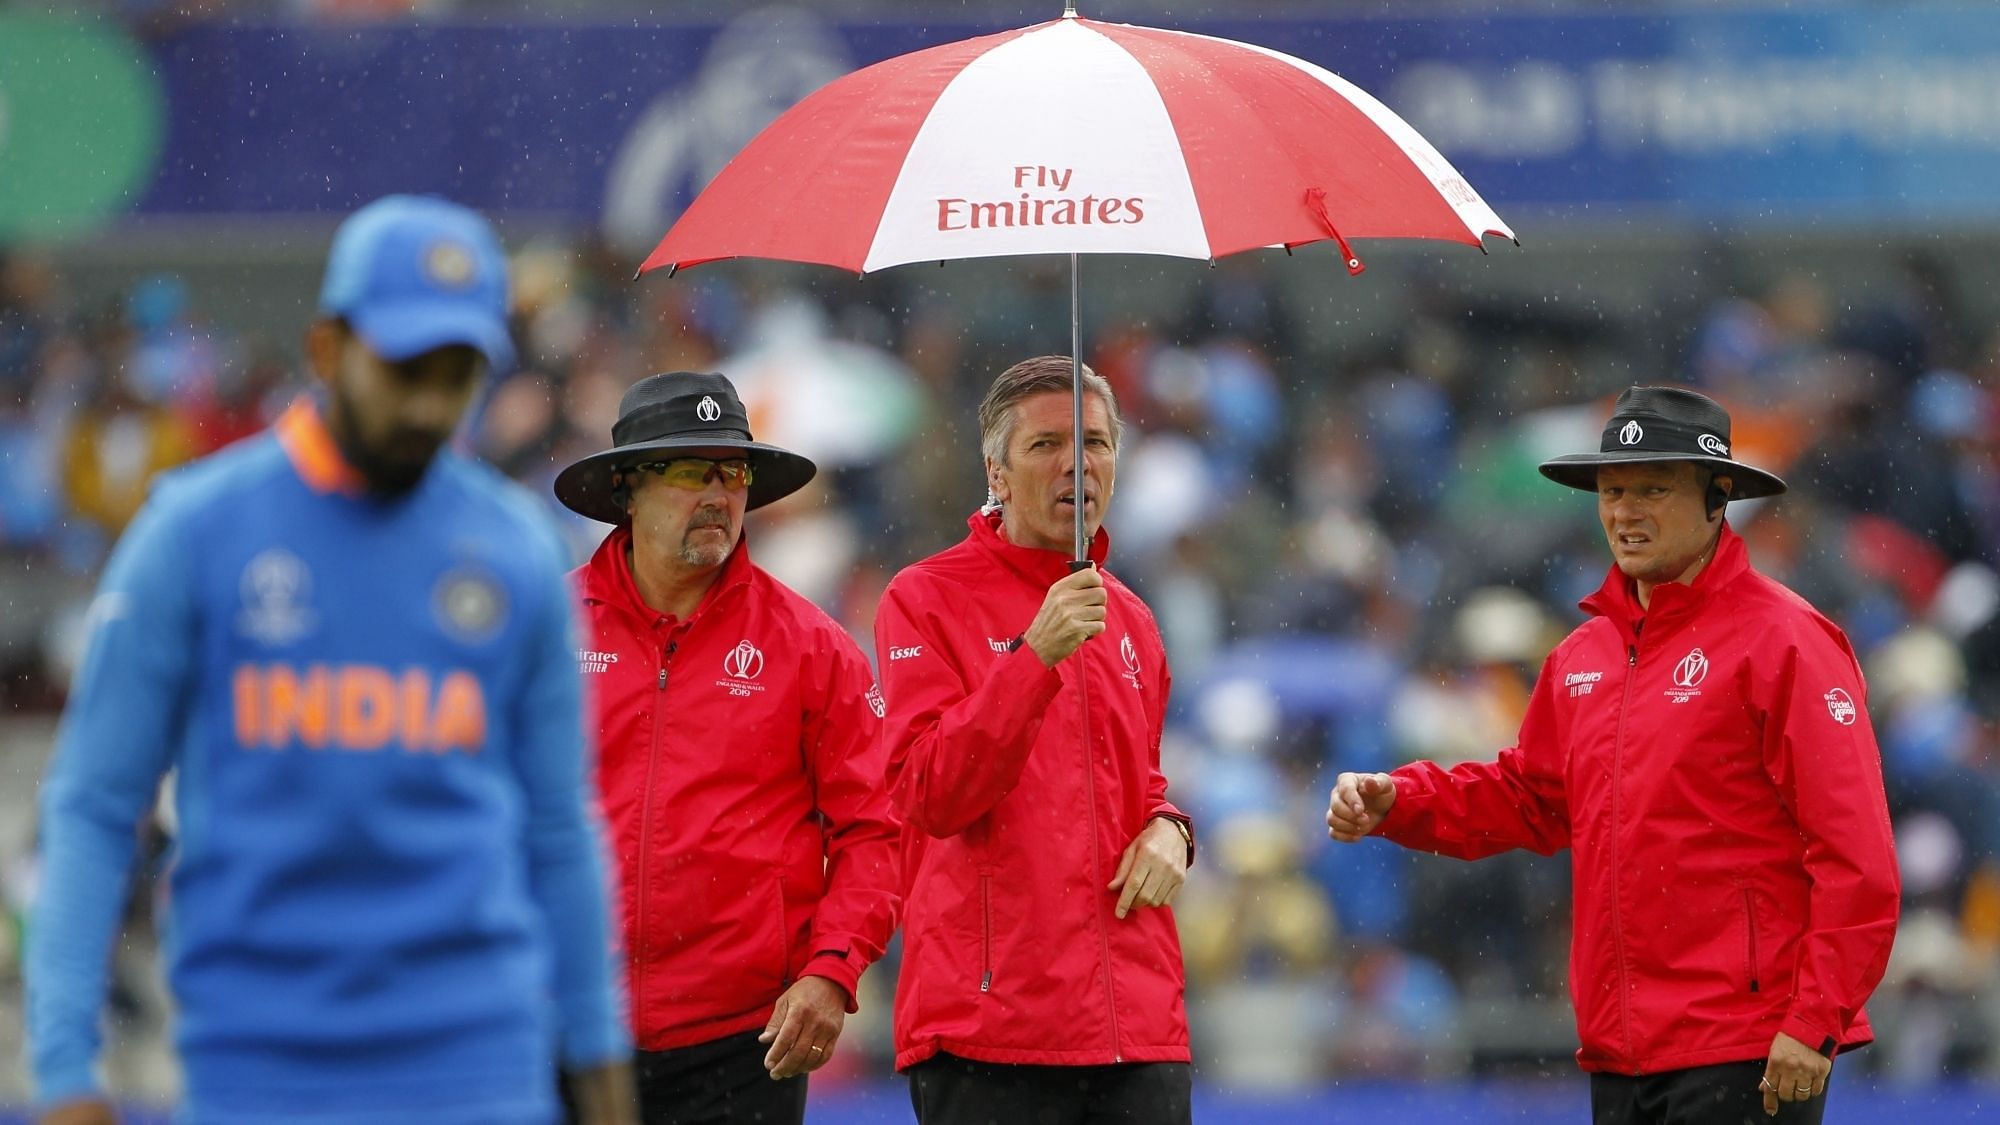 The India vs New Zealand ICC World Cup 2019 Semi Final was interrupted due to rain at Old Trafford.